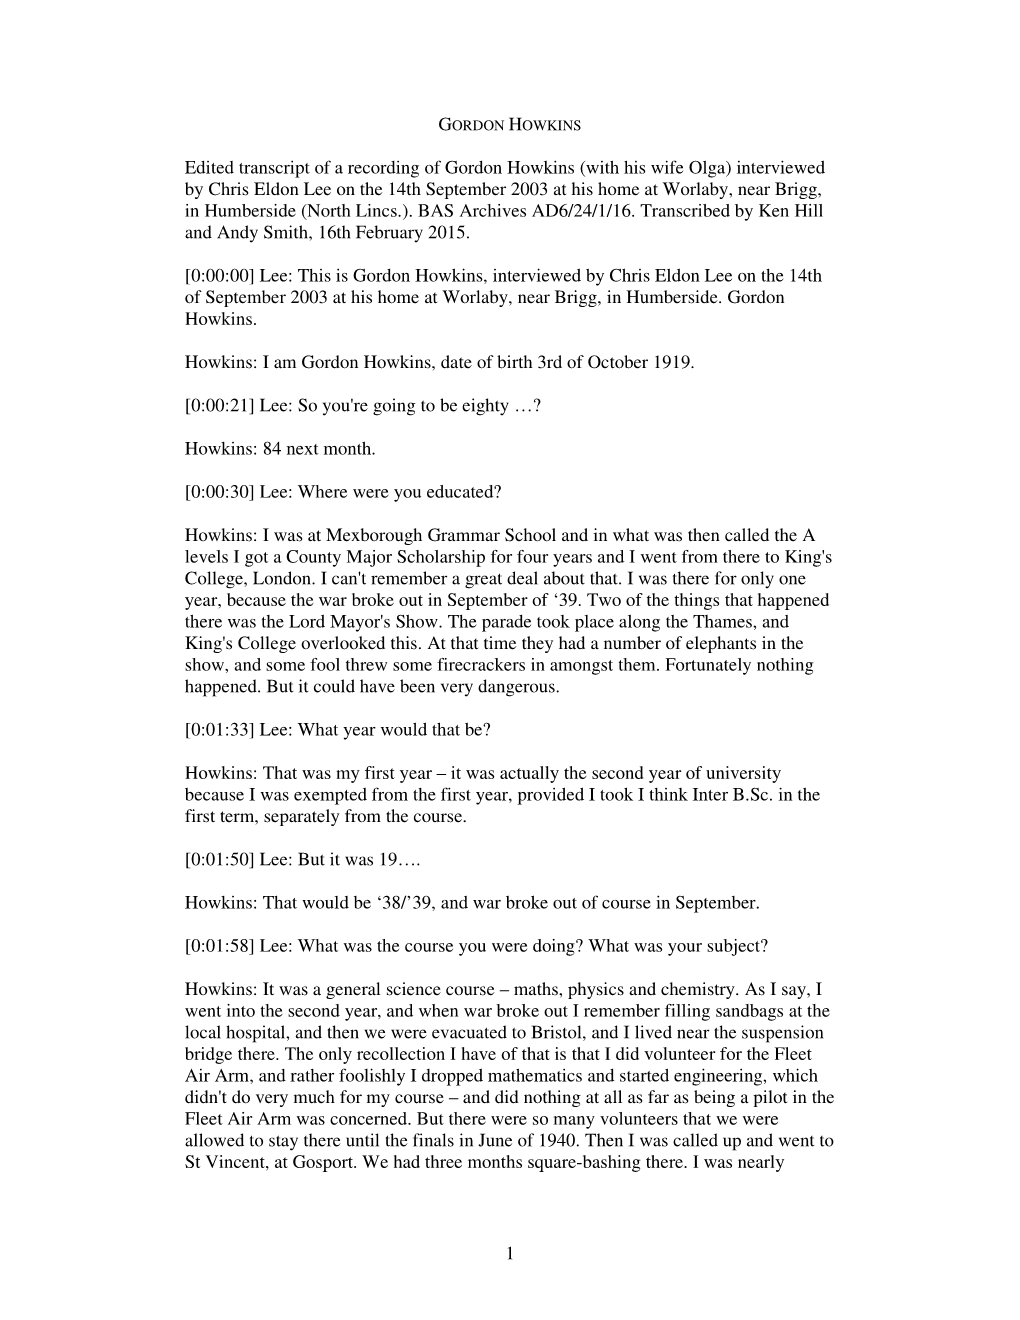 1 Edited Transcript of a Recording of Gordon Howkins (With His Wife